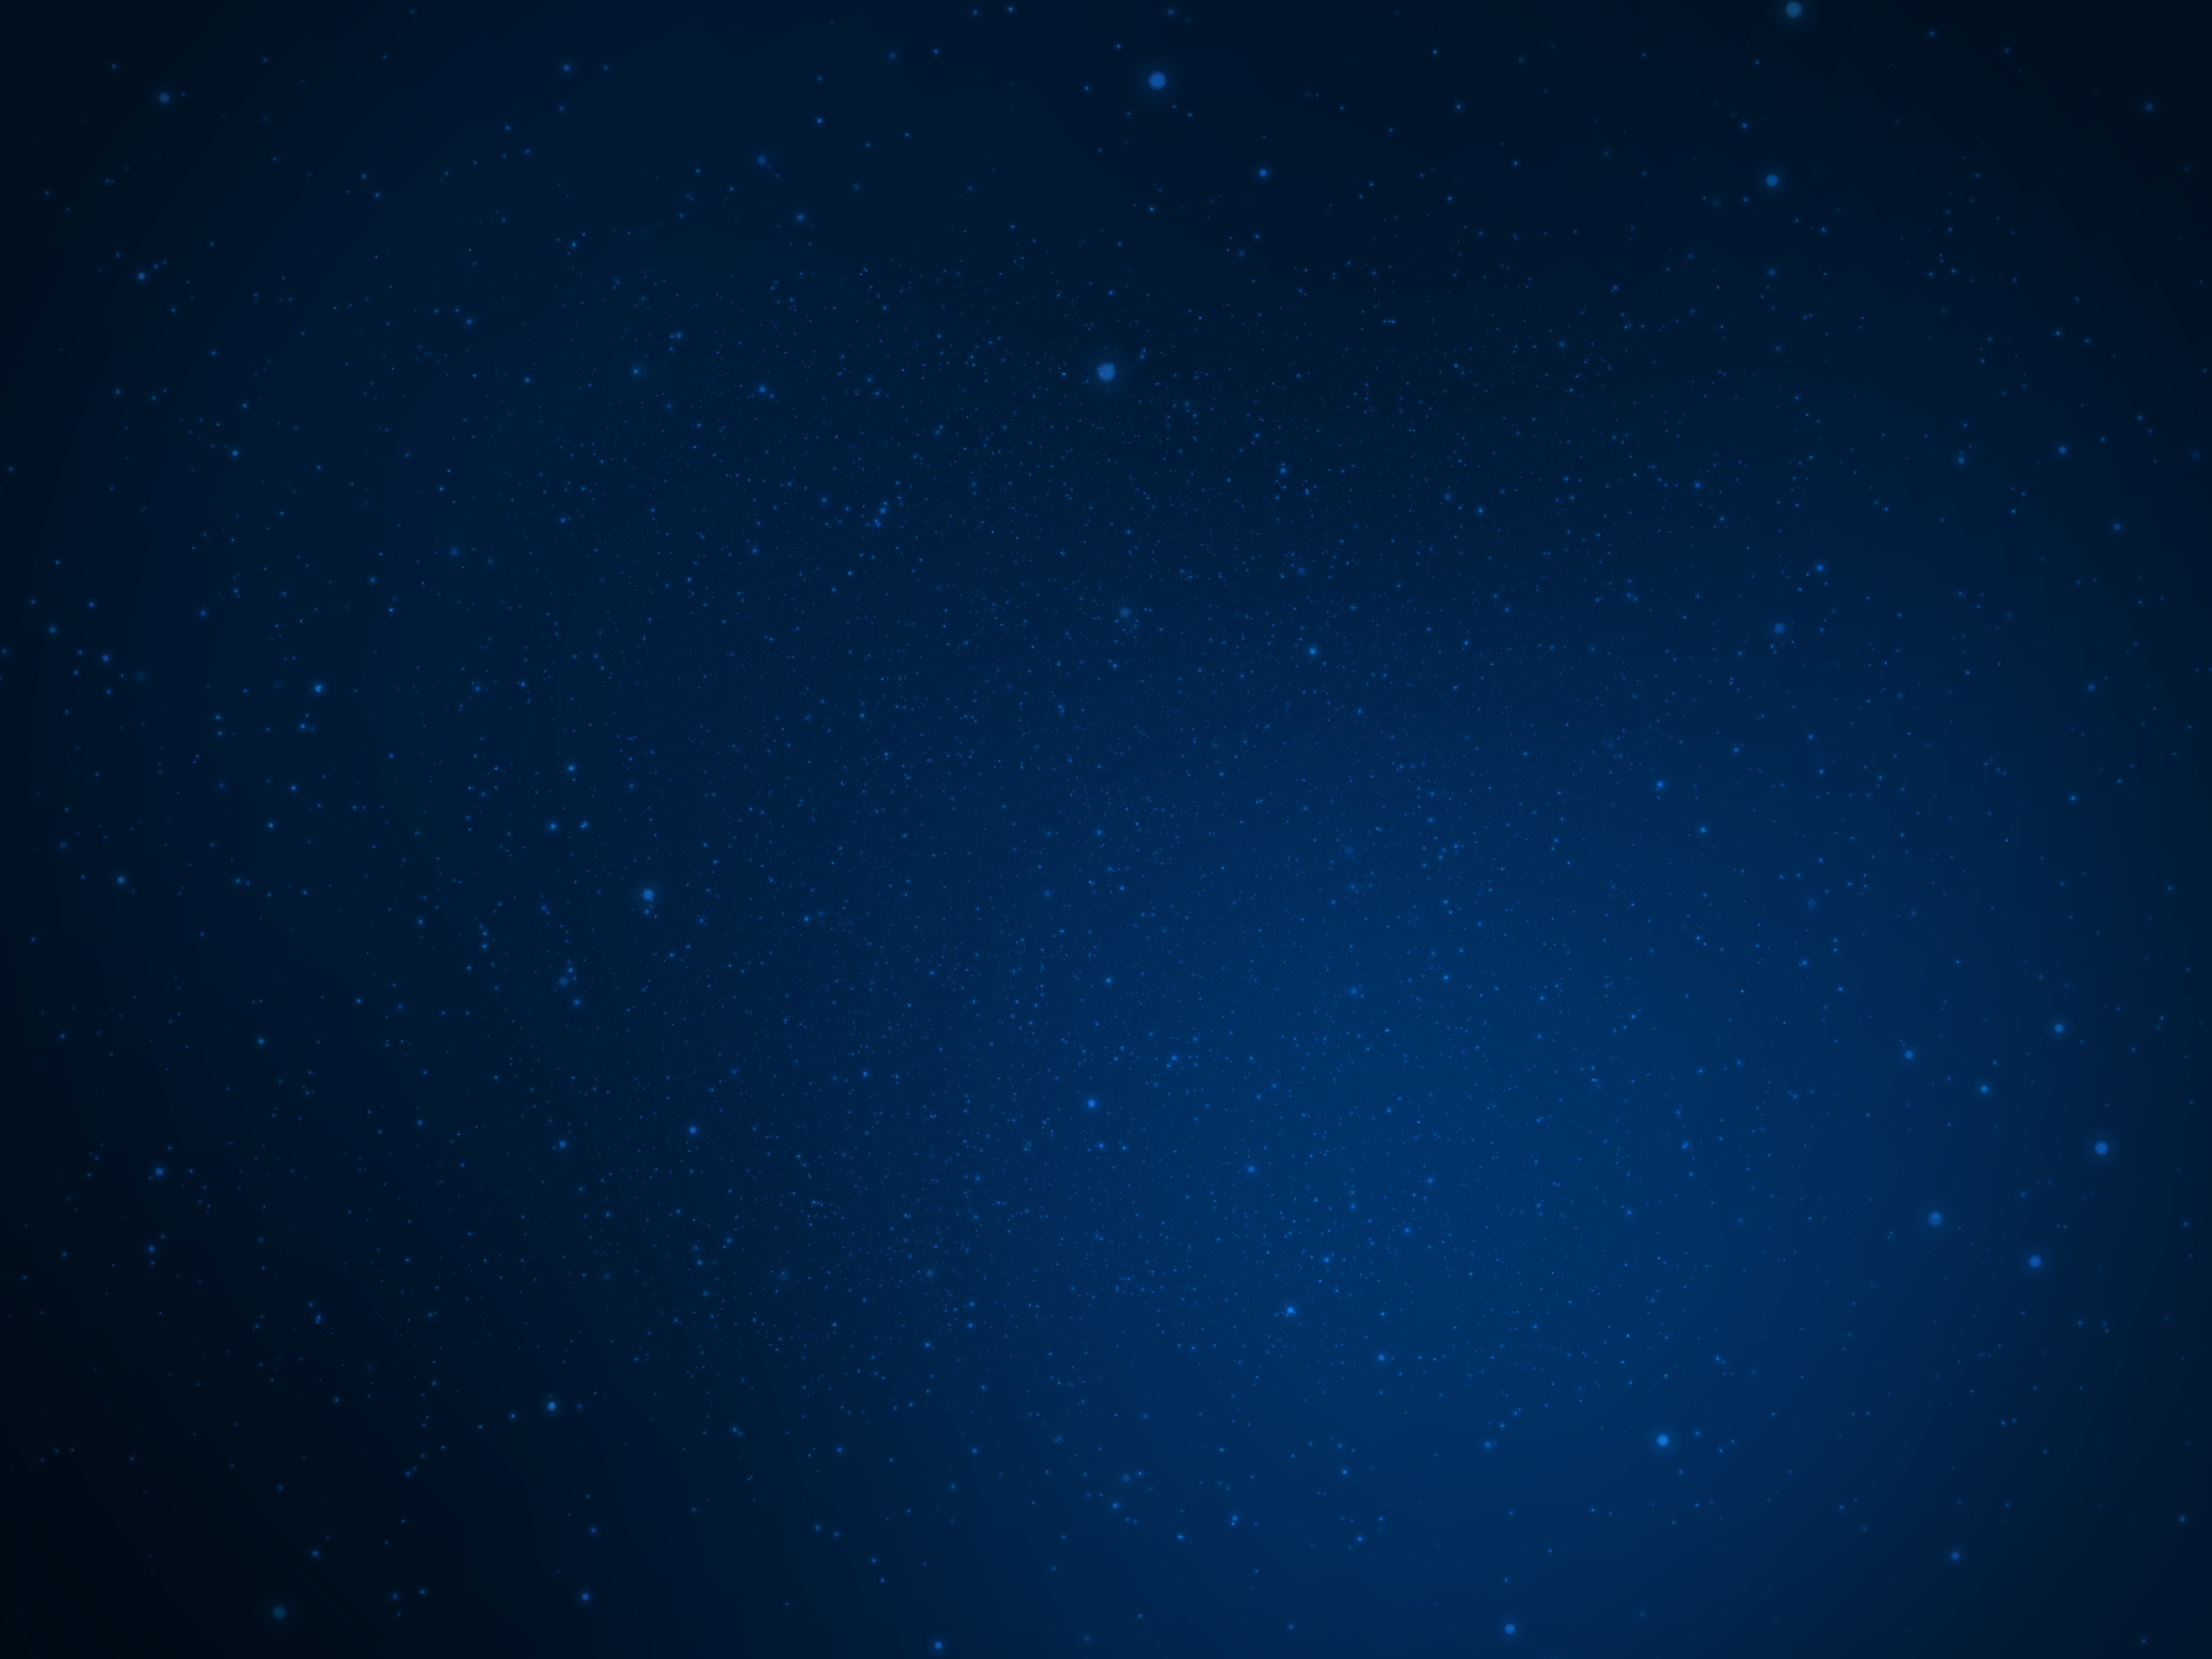 Beautiful Blue Light and Particles - Luxury Space Background Design Element